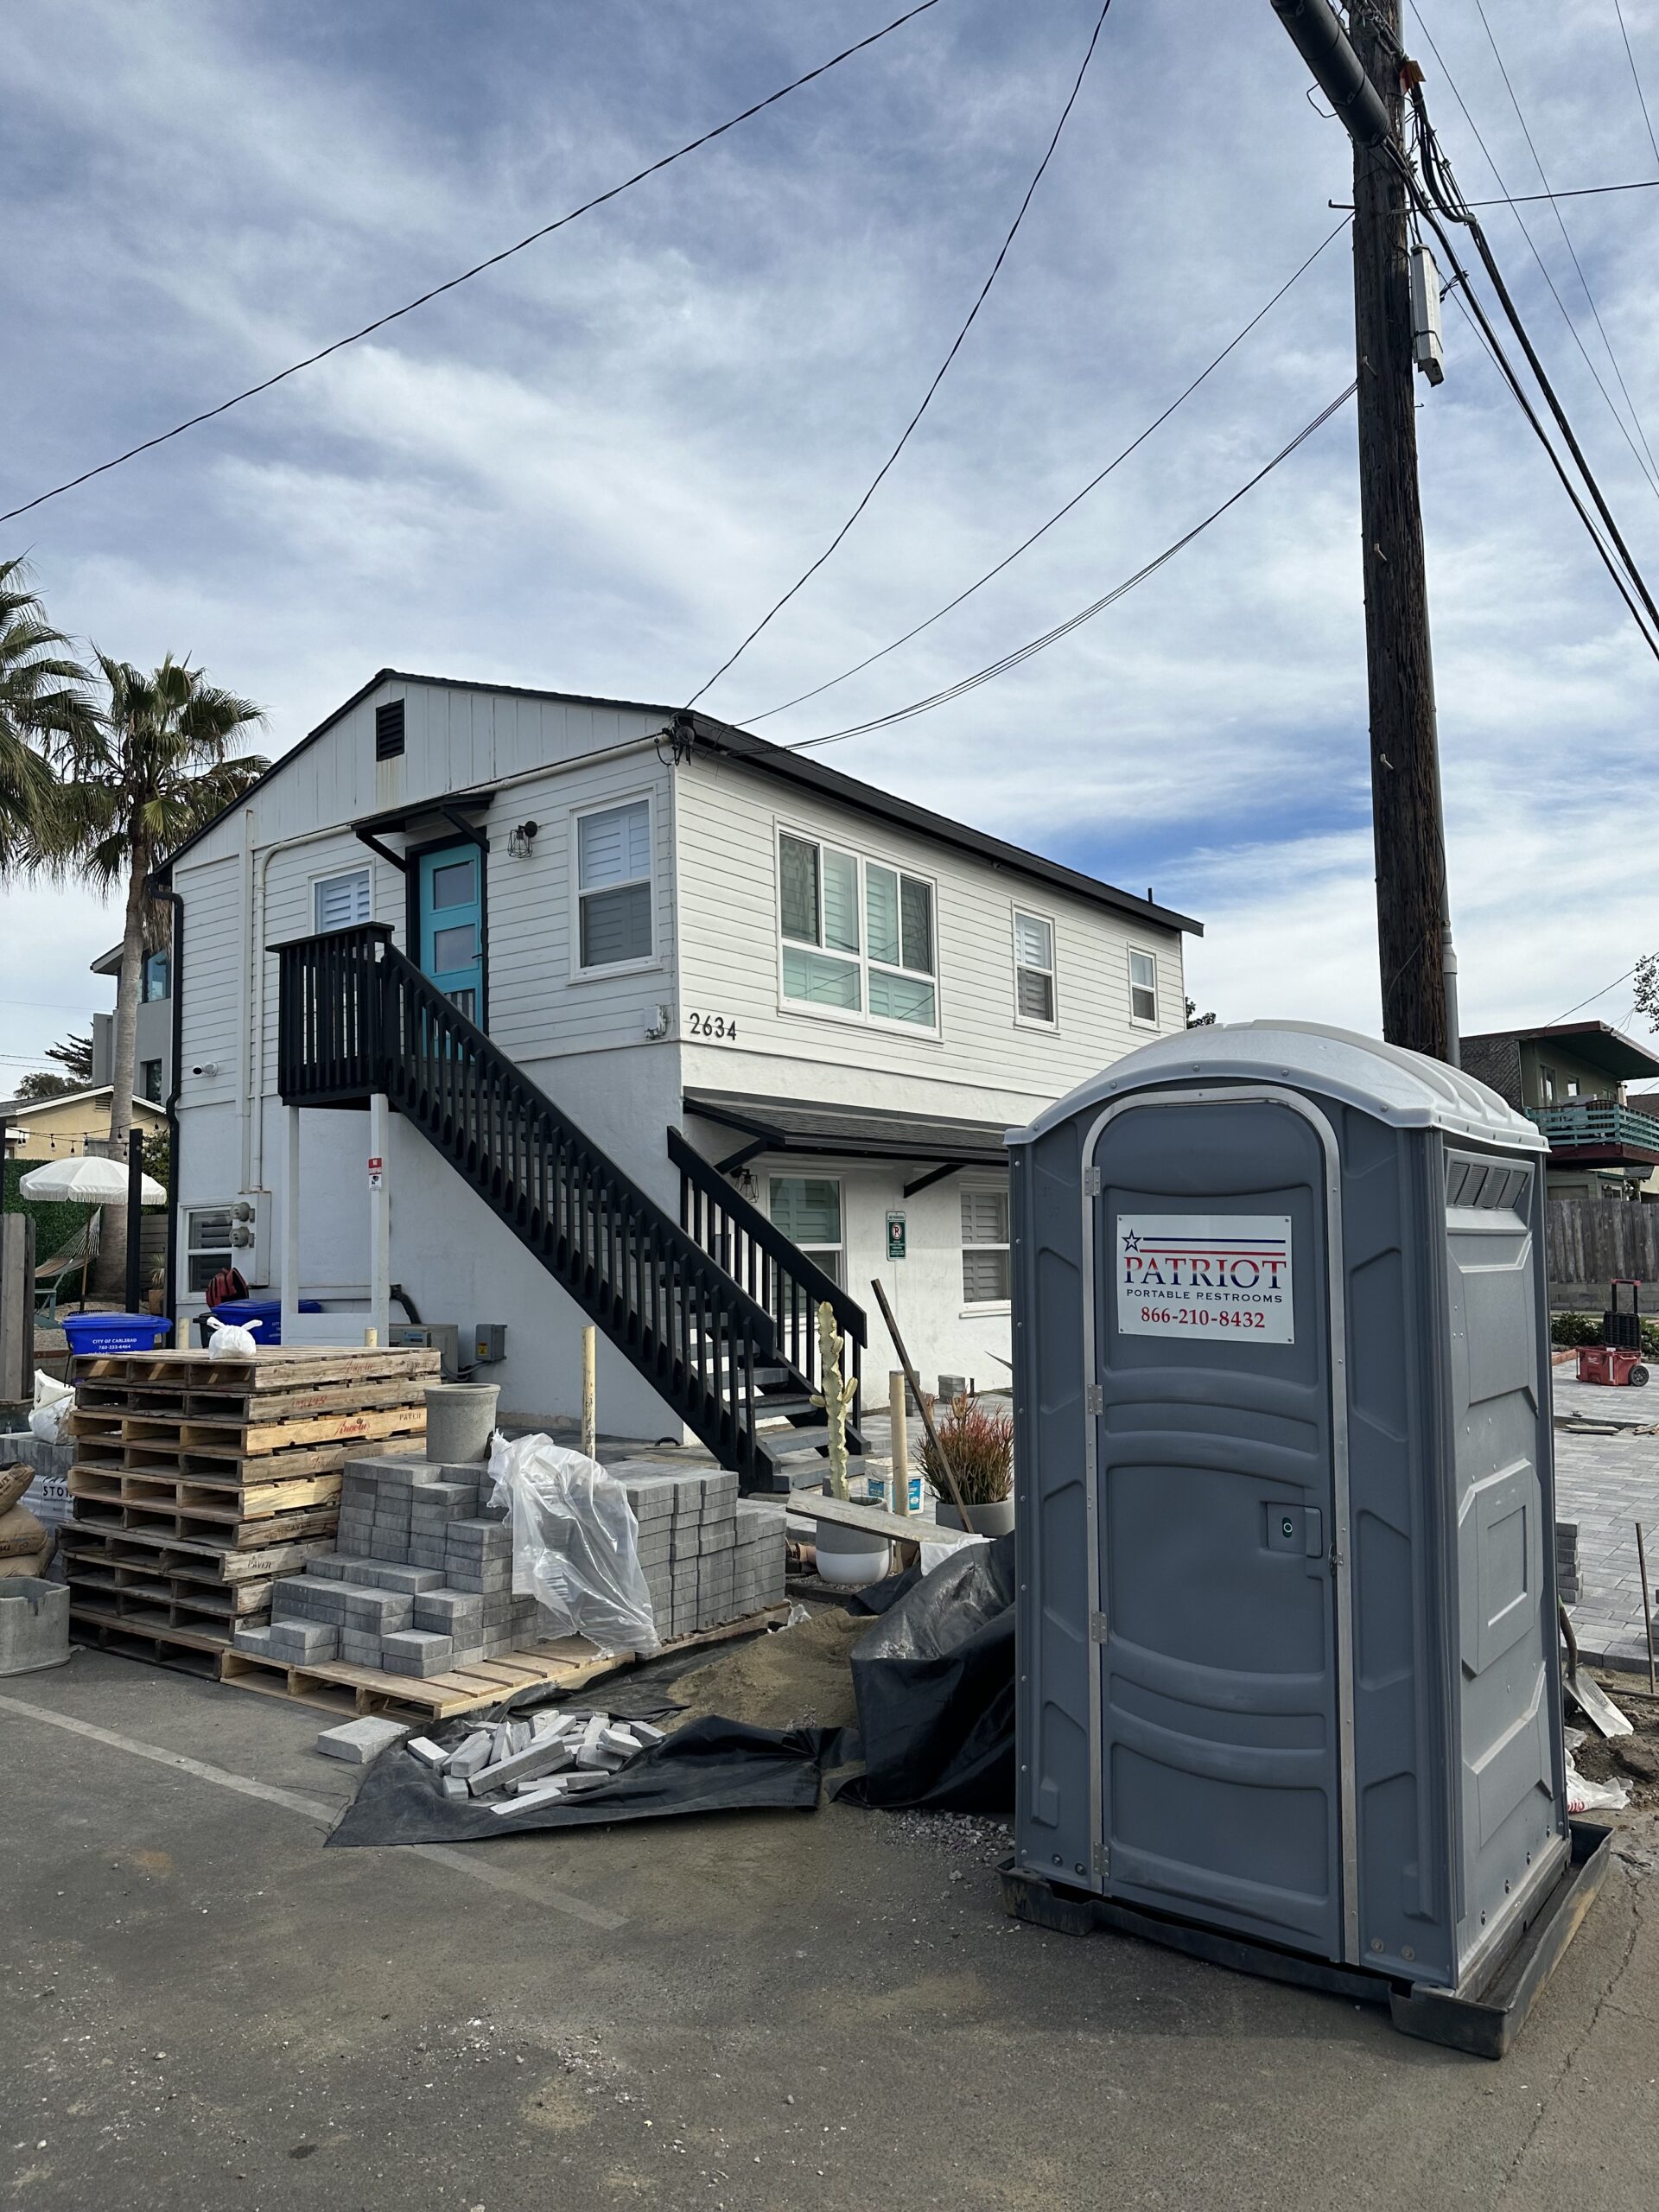 A Patriot Portable Restroom porta potty rental on a home construction site in Carlsbad, CA.